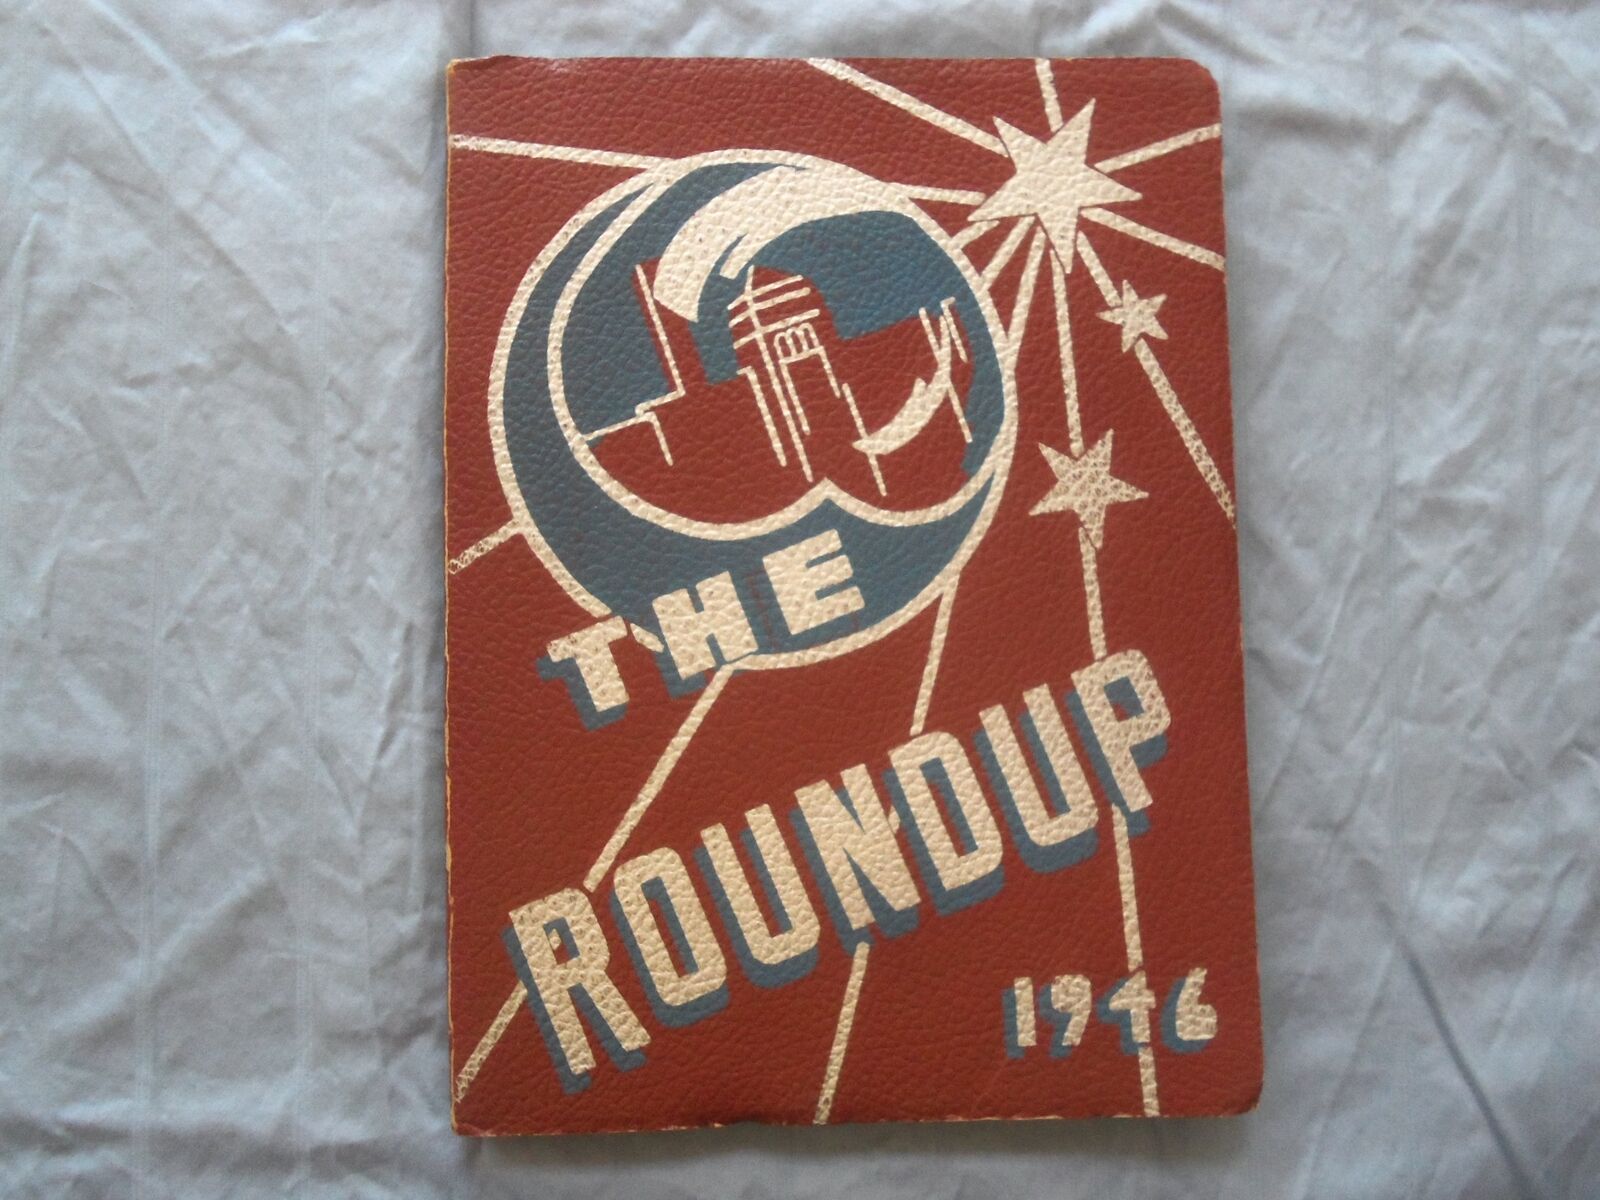 1946 THE ROUNDUP GREAT FALLS HIGH SCHOOL YEARBOOK - GREAT FALLS, MT - YB 3379